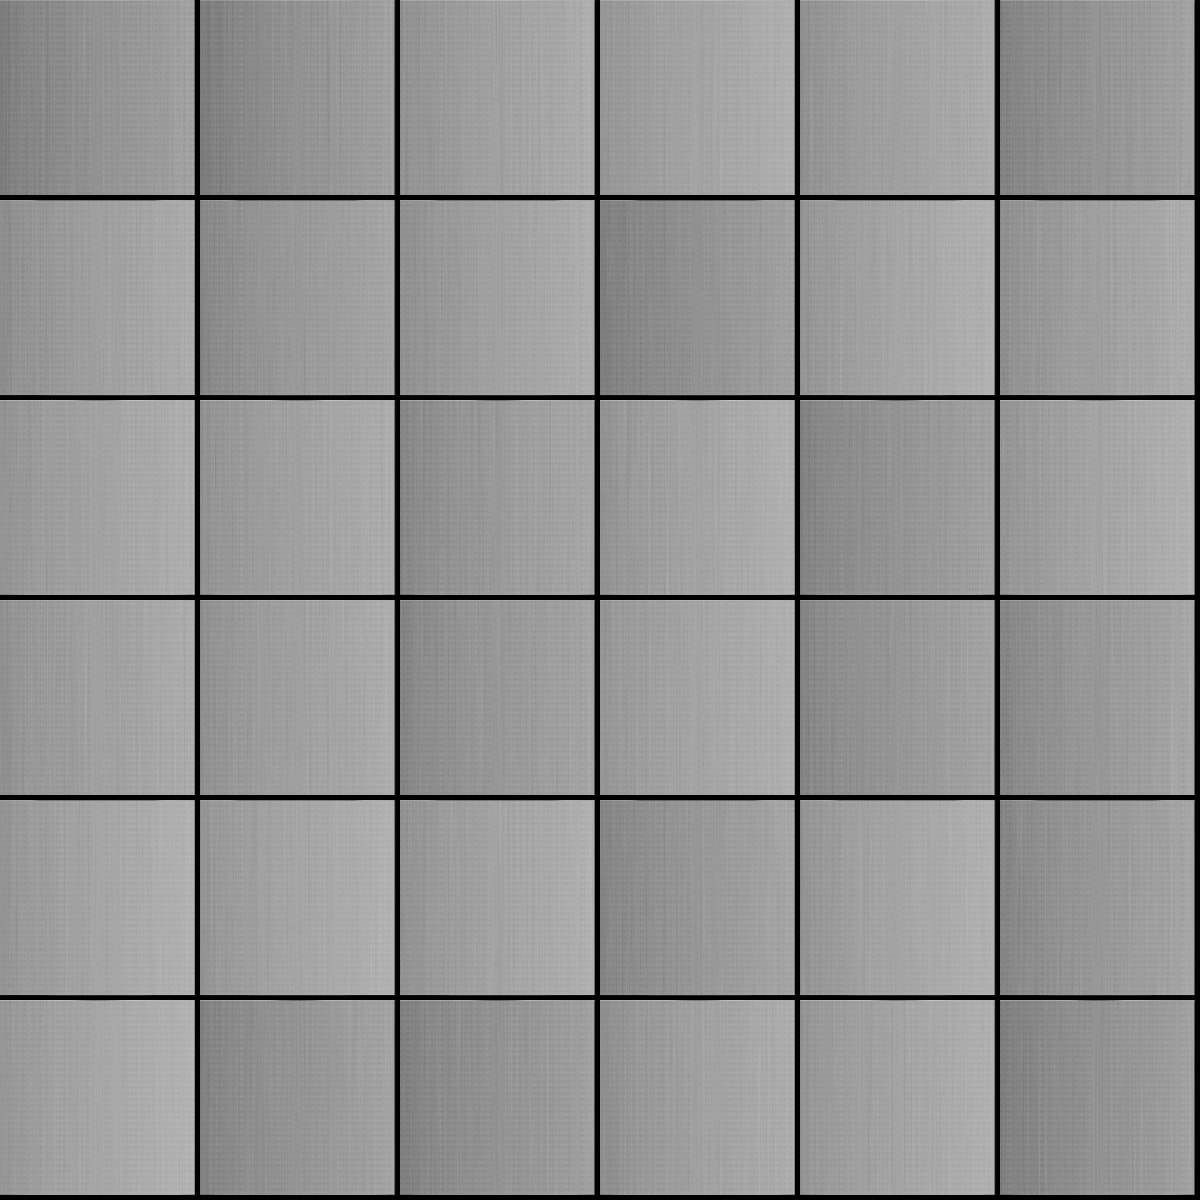 A seamless metal texture with stainless steel sheets arranged in a Stack pattern